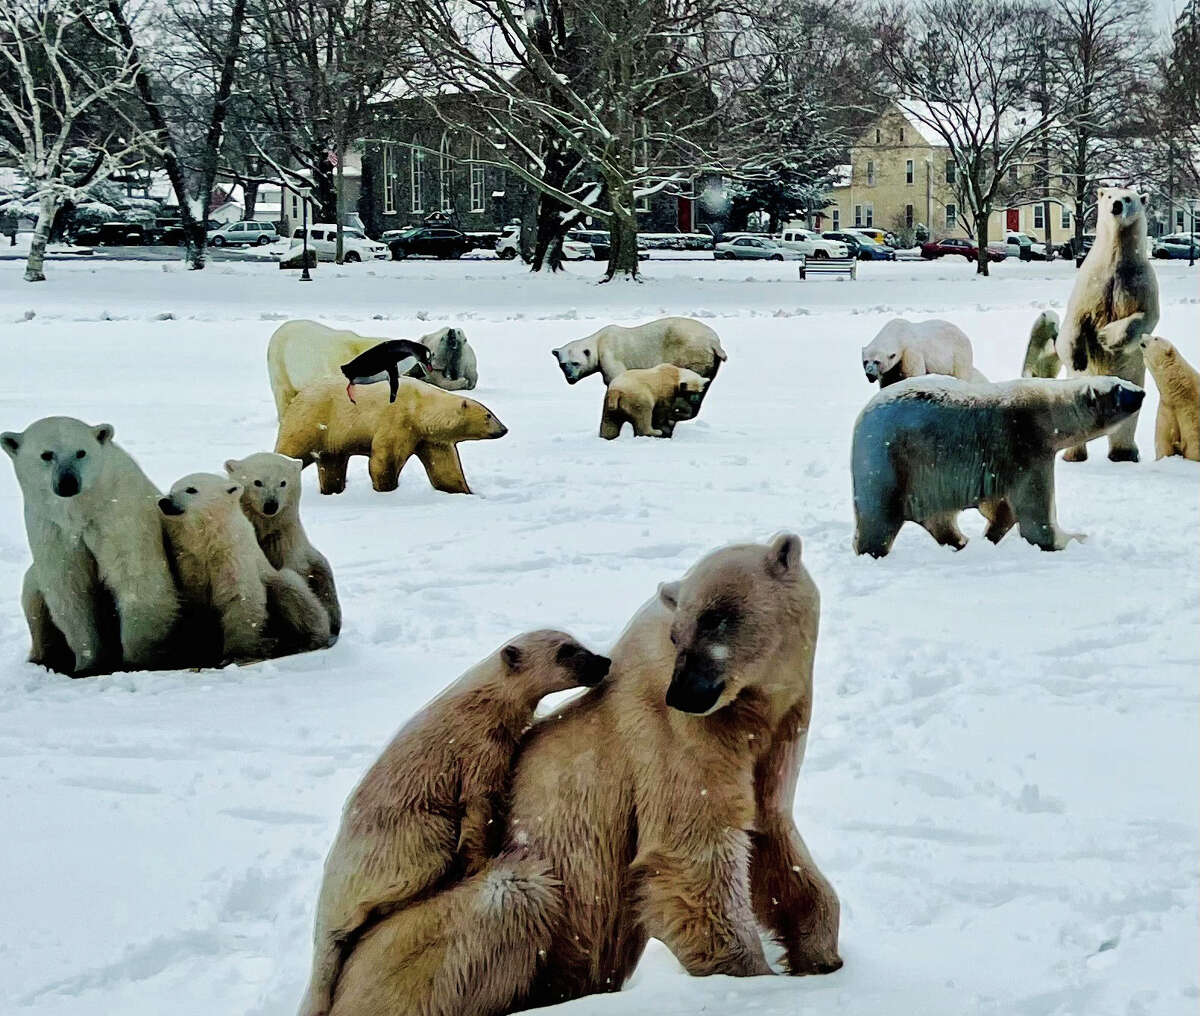 The polar bears look like they are in their natural habitat - but it's not north of the Arctic, but on the Guilford Green.